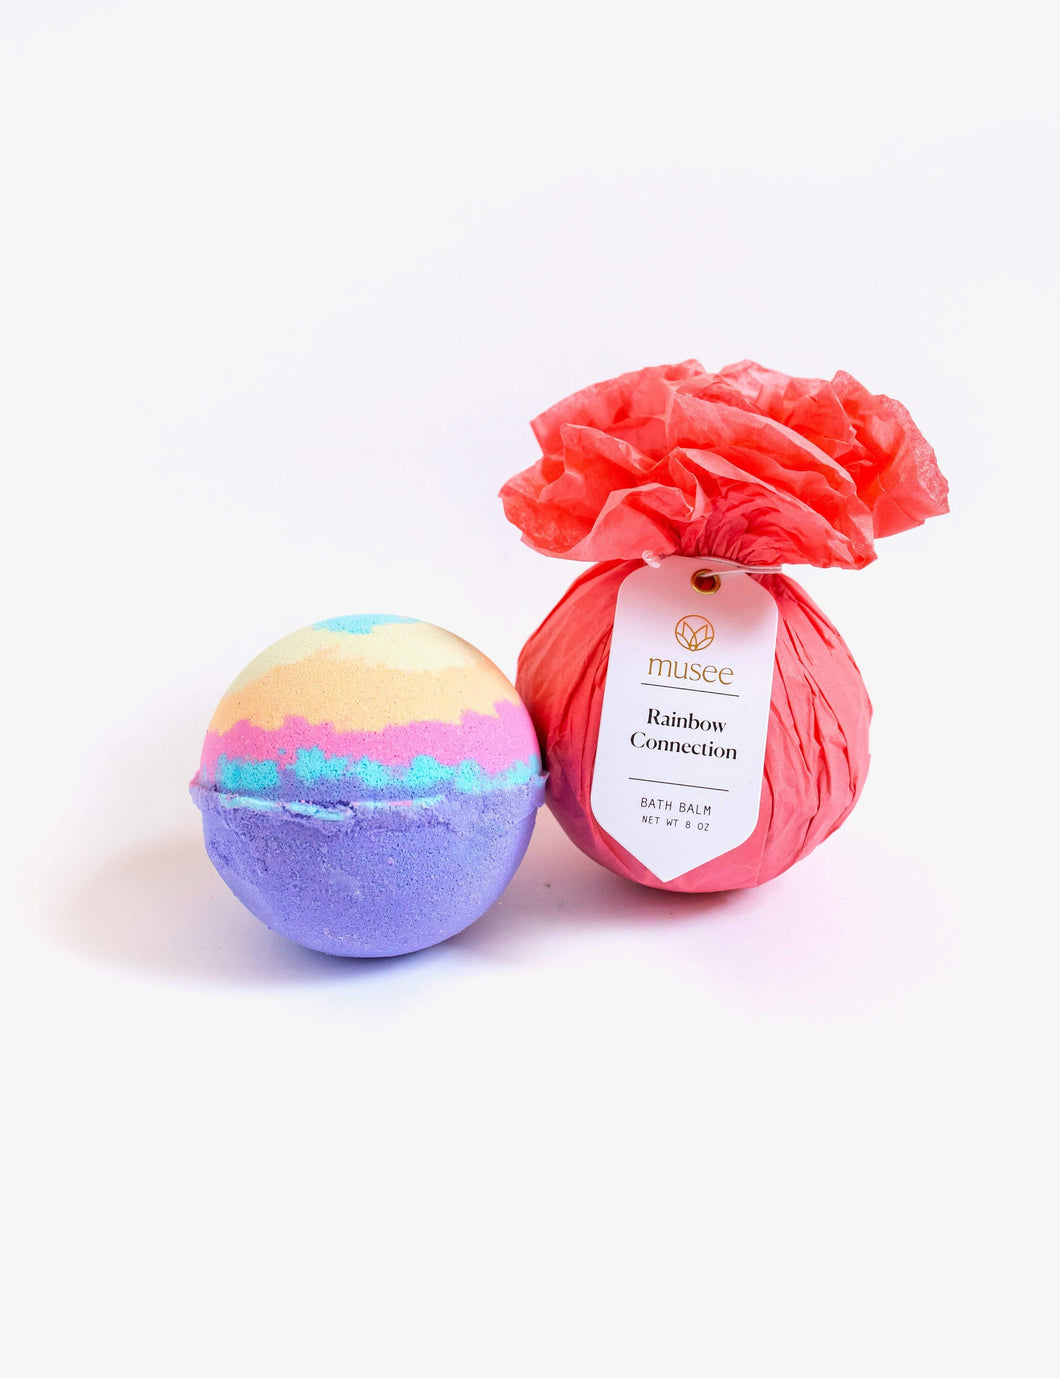 MUSEE Personal Care Rainbow Connection Bath Balm